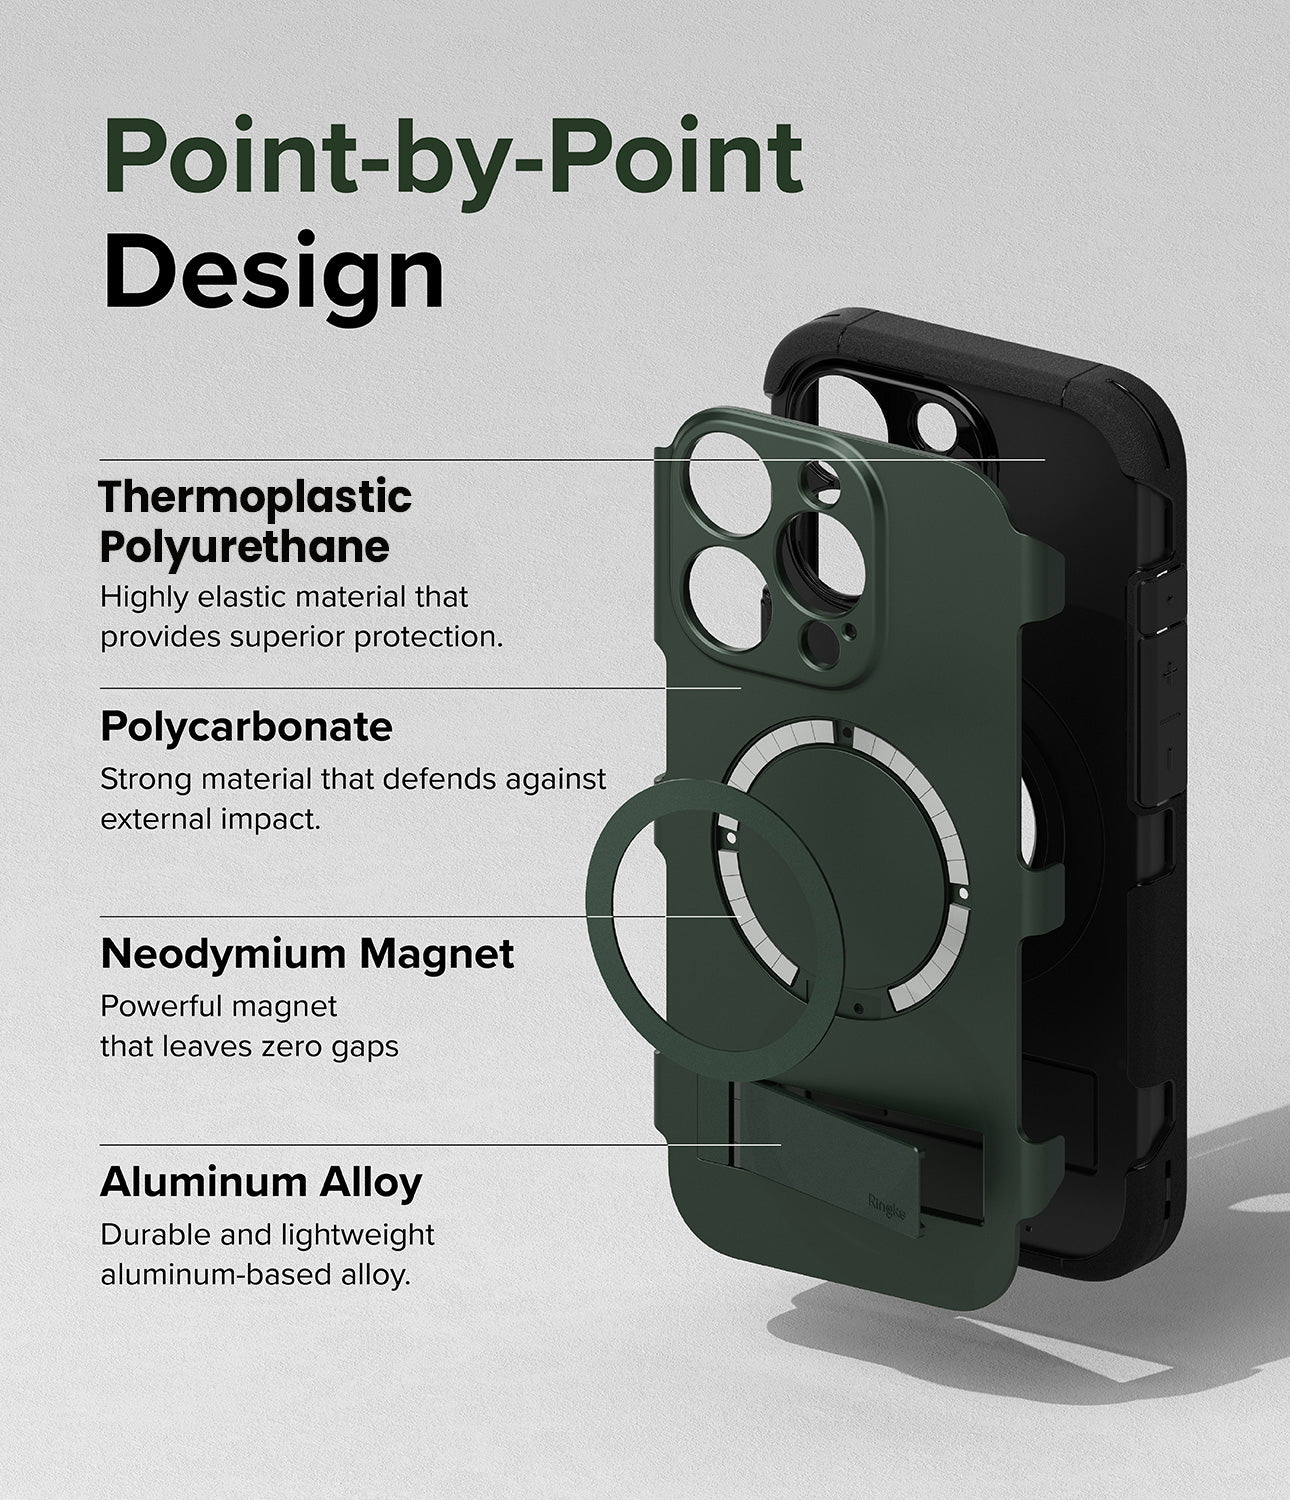 iPhone 15 Pro Max Case | Alles - Dark Green - Point-By-Point Design. Highly elastic material that provides superior protection with Thermoplastic Polyurethane. Strong material that defends against external impact polycarbonate. Powerful magnet that leaves zero gaps with neodymium magnet. Durable and lightweight aluminum-based alloy with Aluminum Alloy.